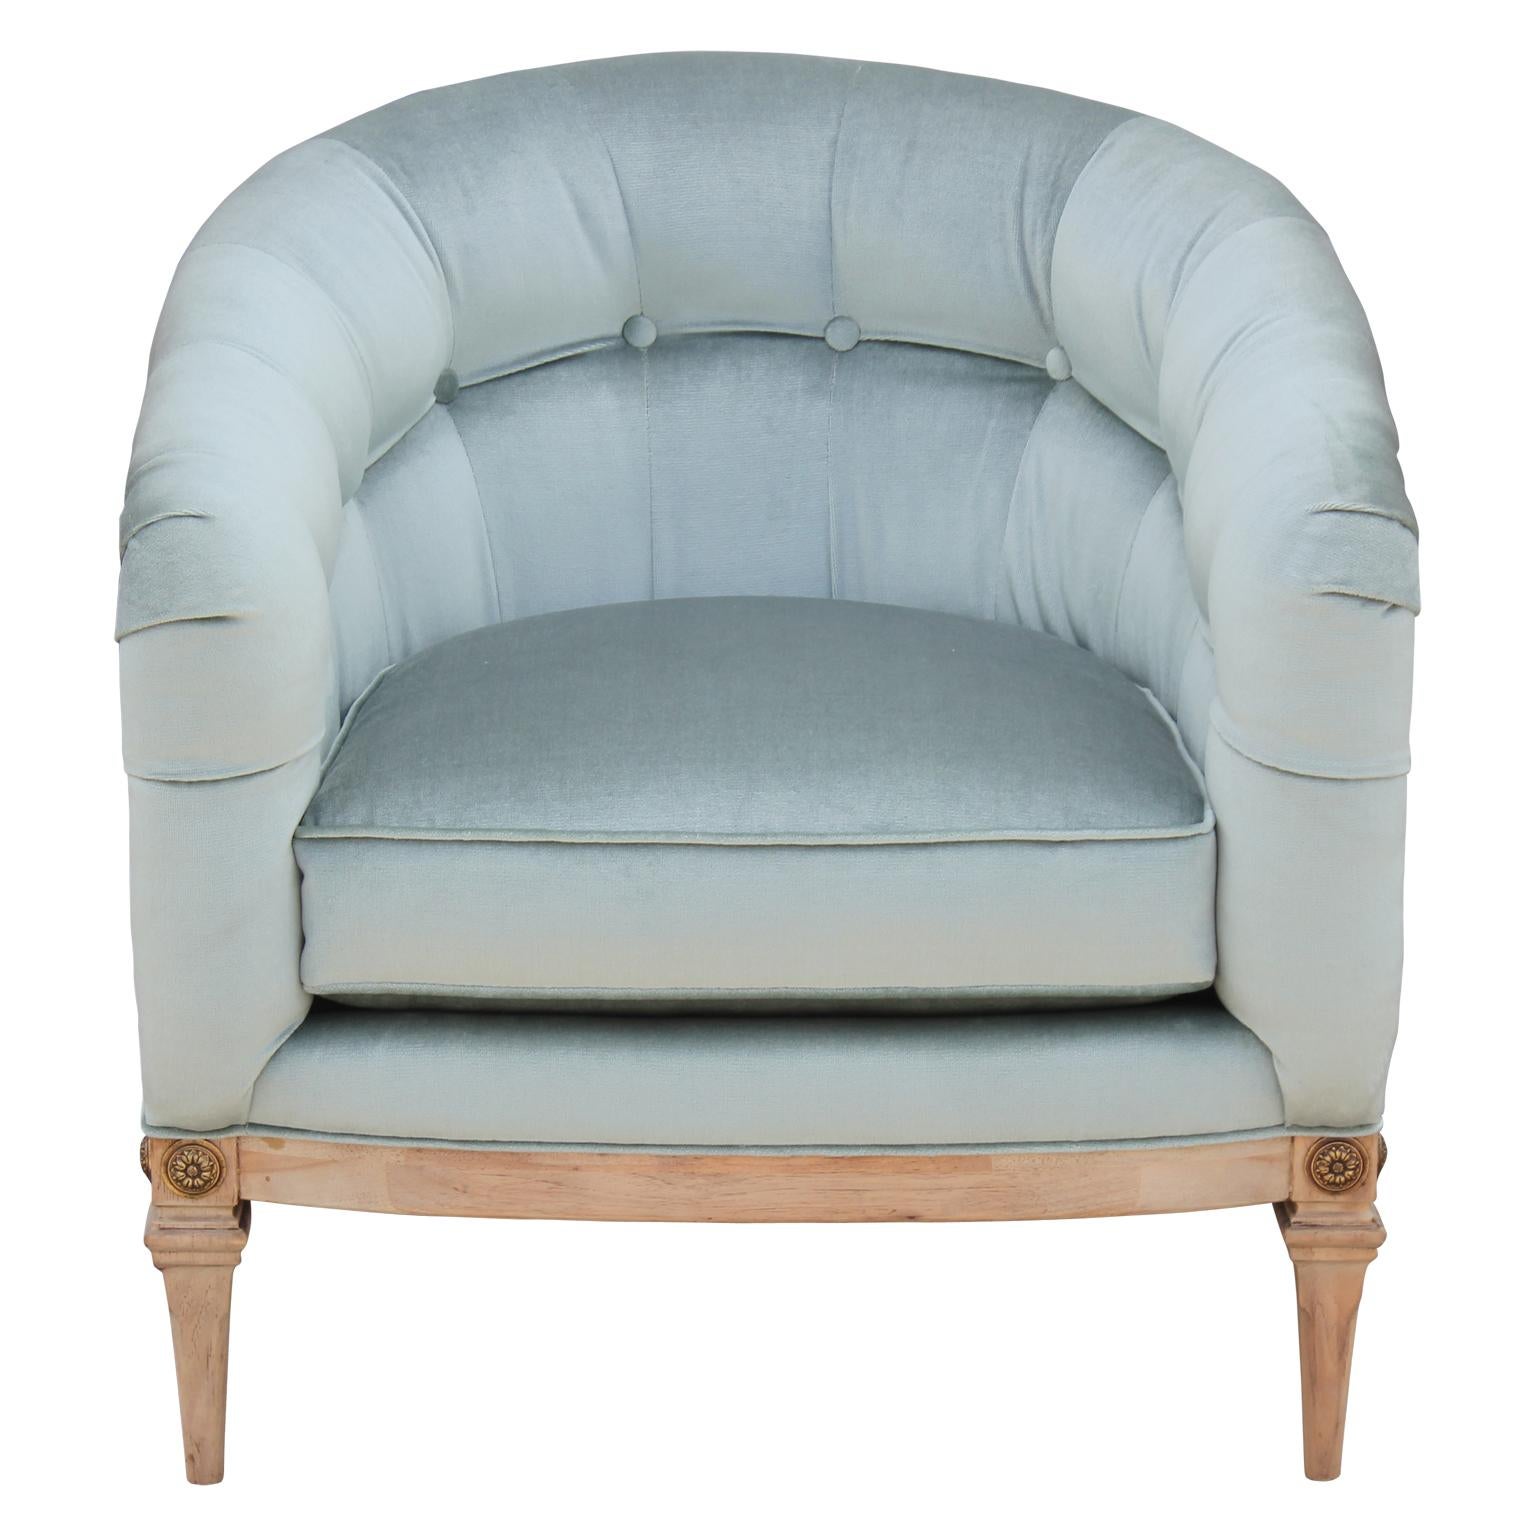 Pair of gorgeous French barrel back lounge chairs freshly upholstered in a light blue velvet, with a neutral finish and brass accents.